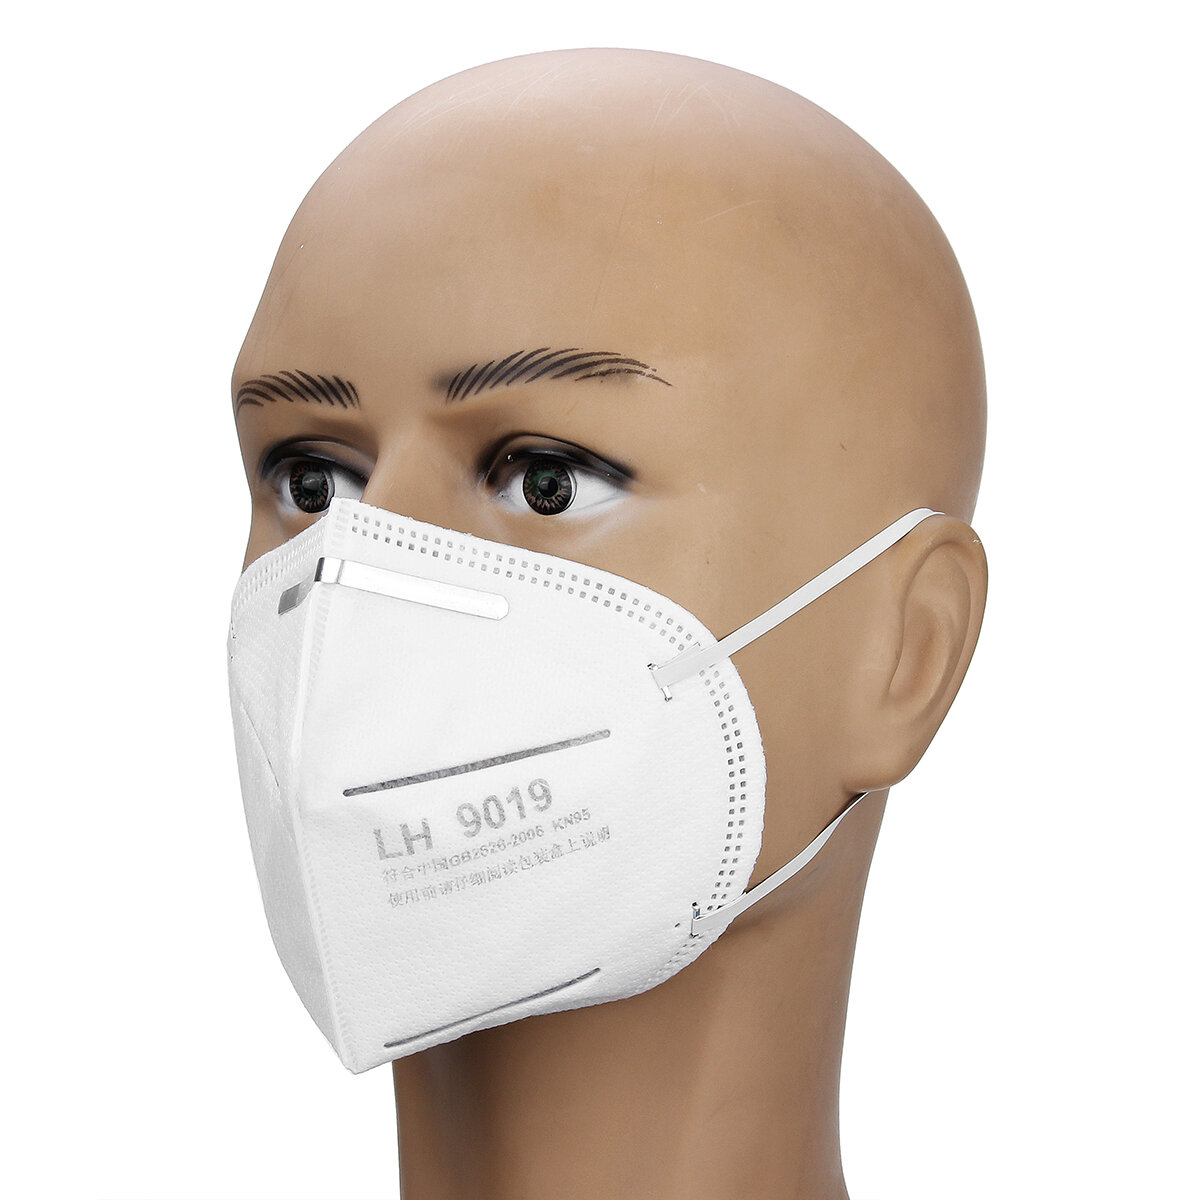 

2Pcs KN95 Face Mask 3 Days Reusable 3D Mouth Face Masks For Dustproof Windproof Anti-Smog Anti-PM2.5 Anti-Pollution Pers